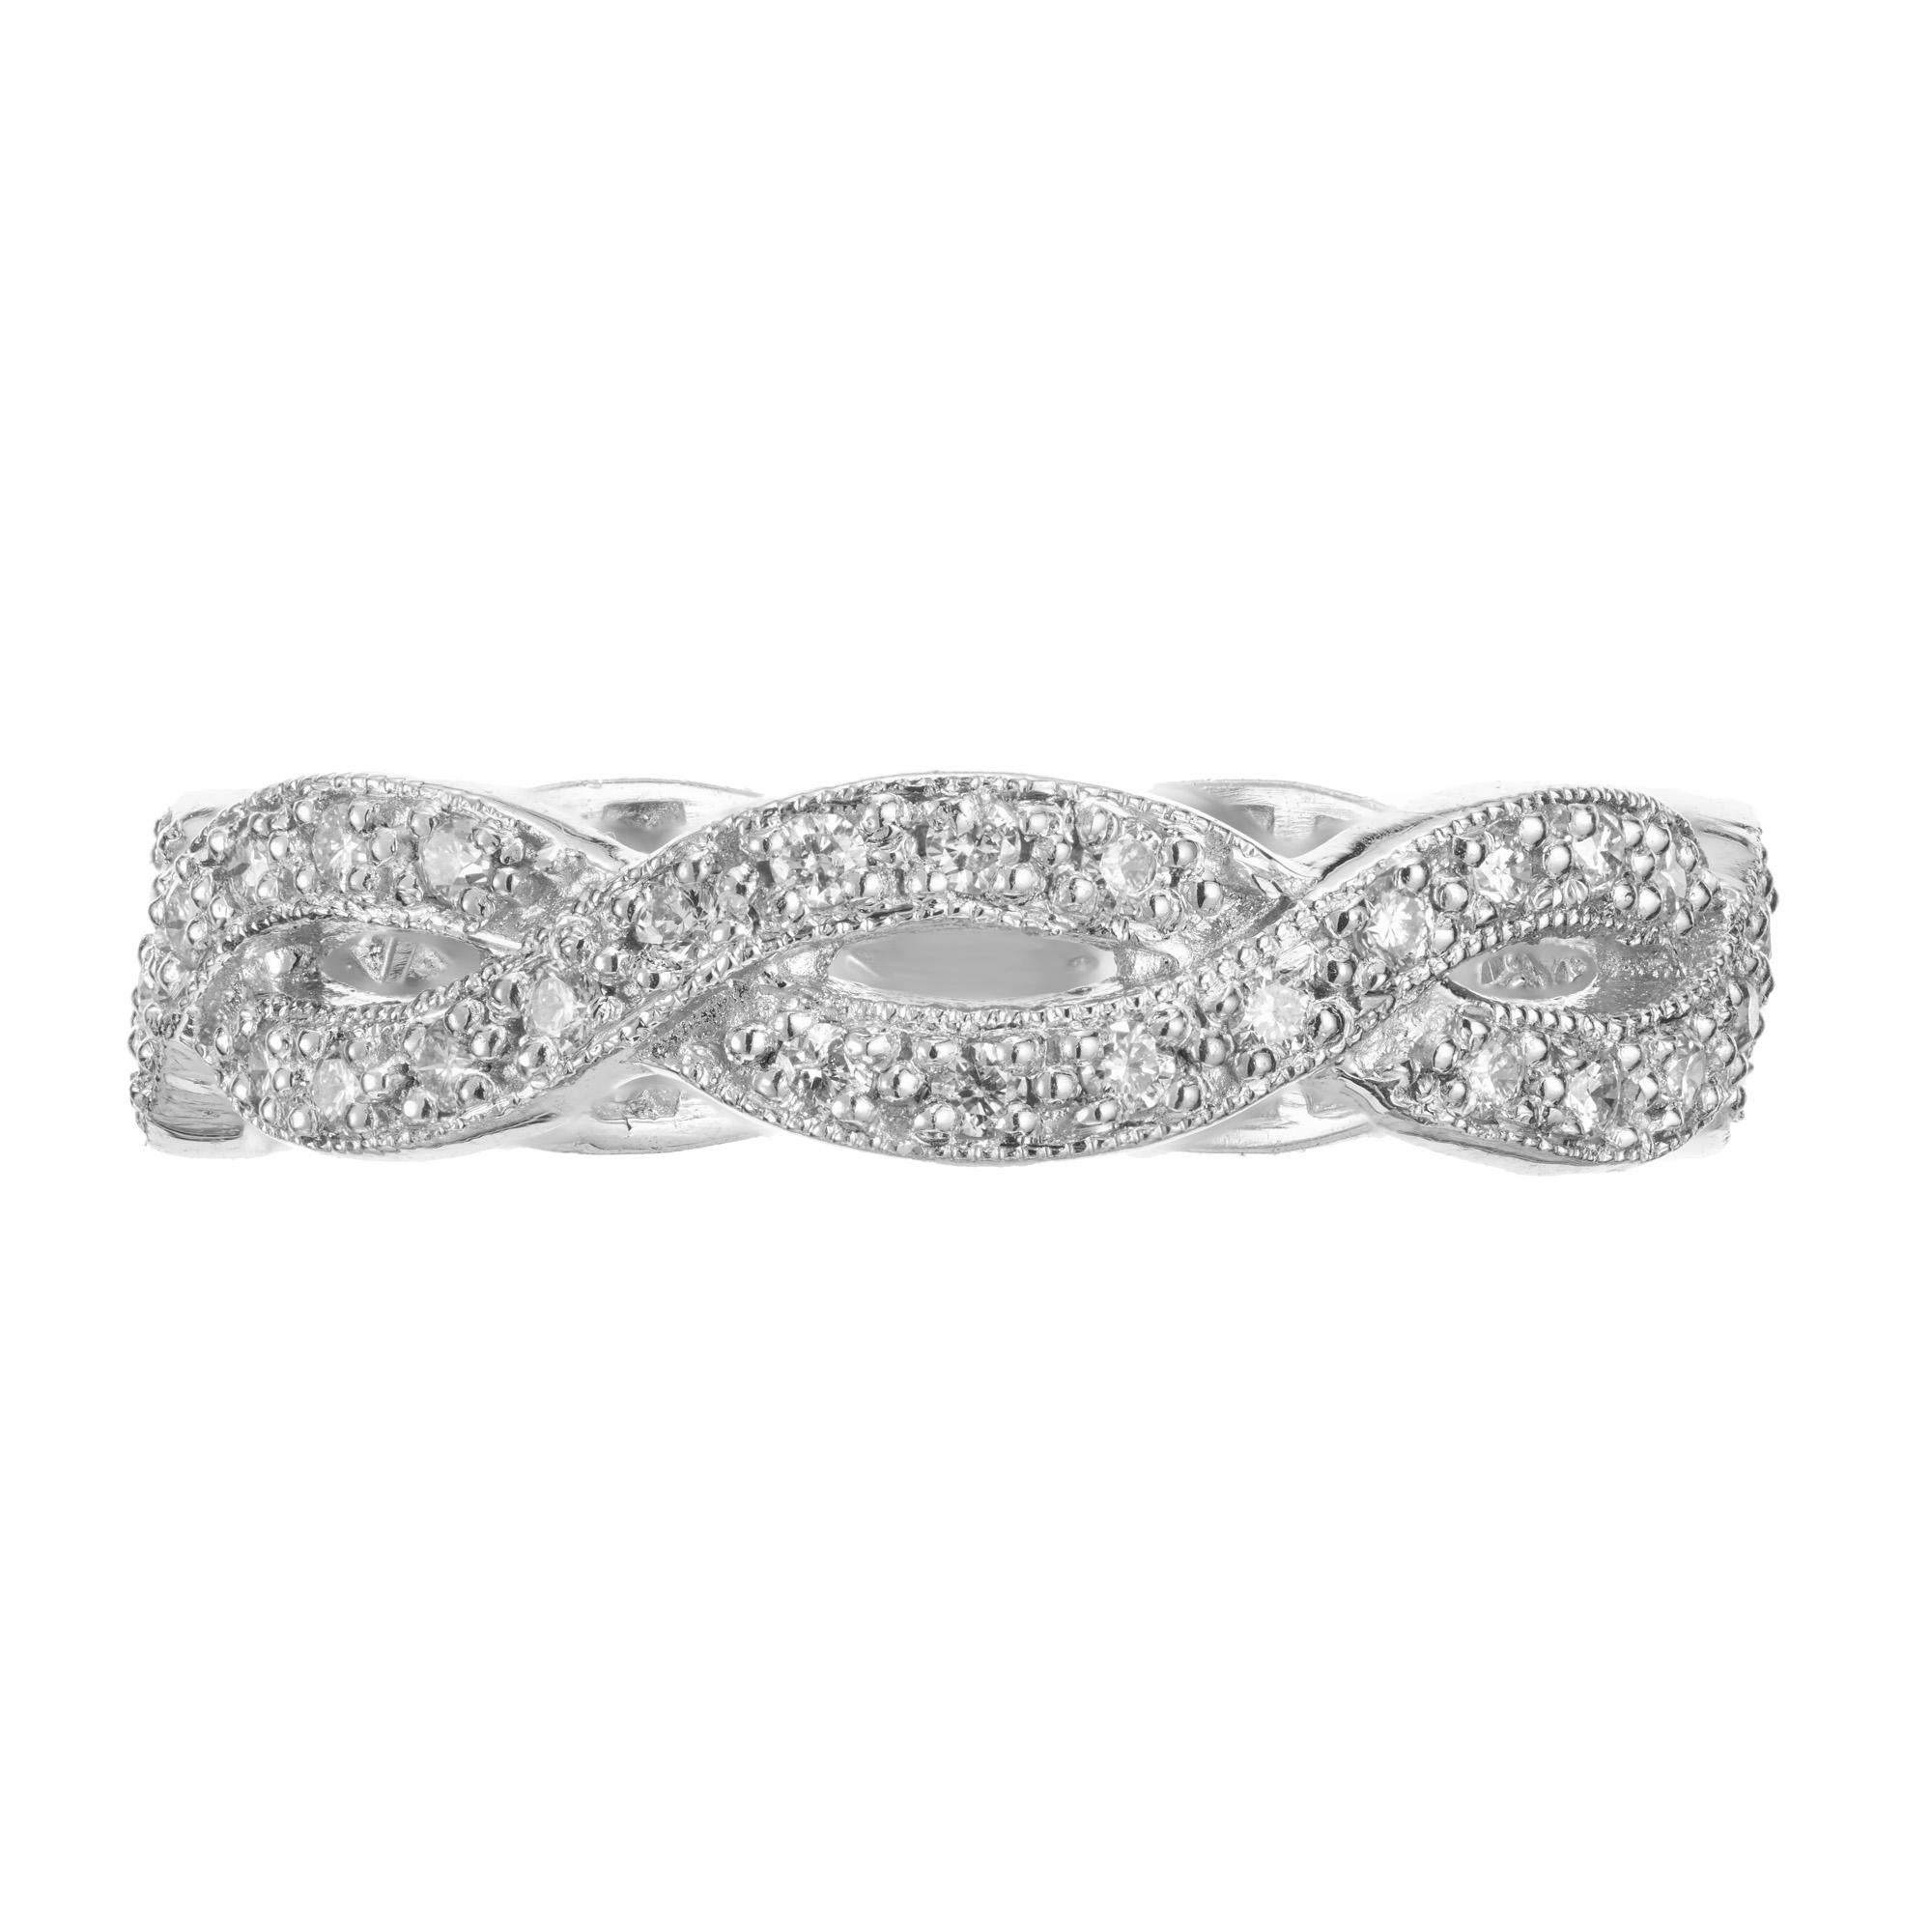 Diamond wedding band ring. 58 full cut round diamonds set in a platinum cross over wedding band design.  

58 full cut diamonds, approx. total weight .40cts, G, VS
Size 6 and not sizable
Platinum
Stamped: 950
3.5 grams
Tested: Platinum
Width: